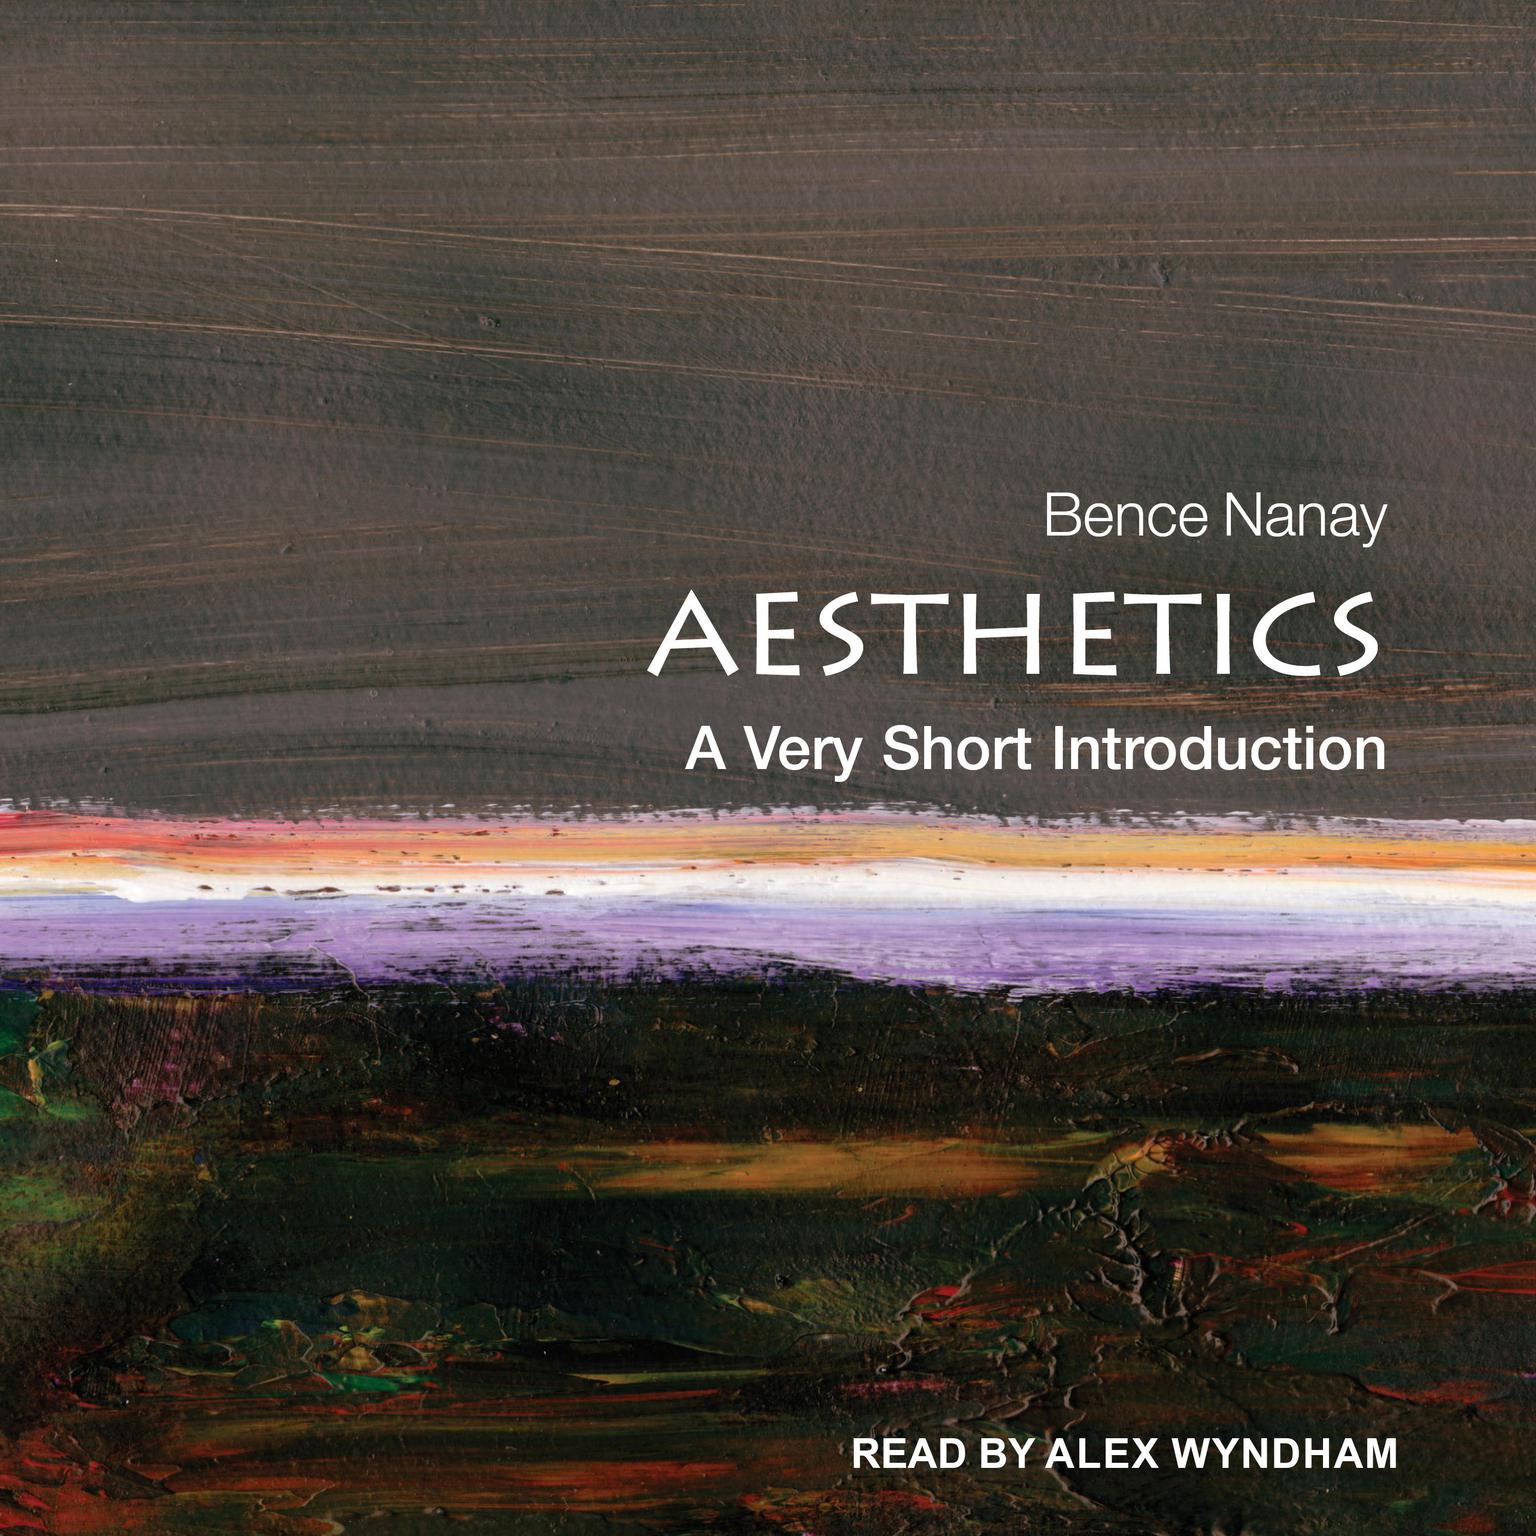 Aesthetics: A Very Short Introduction Audiobook, by Bence Nanay